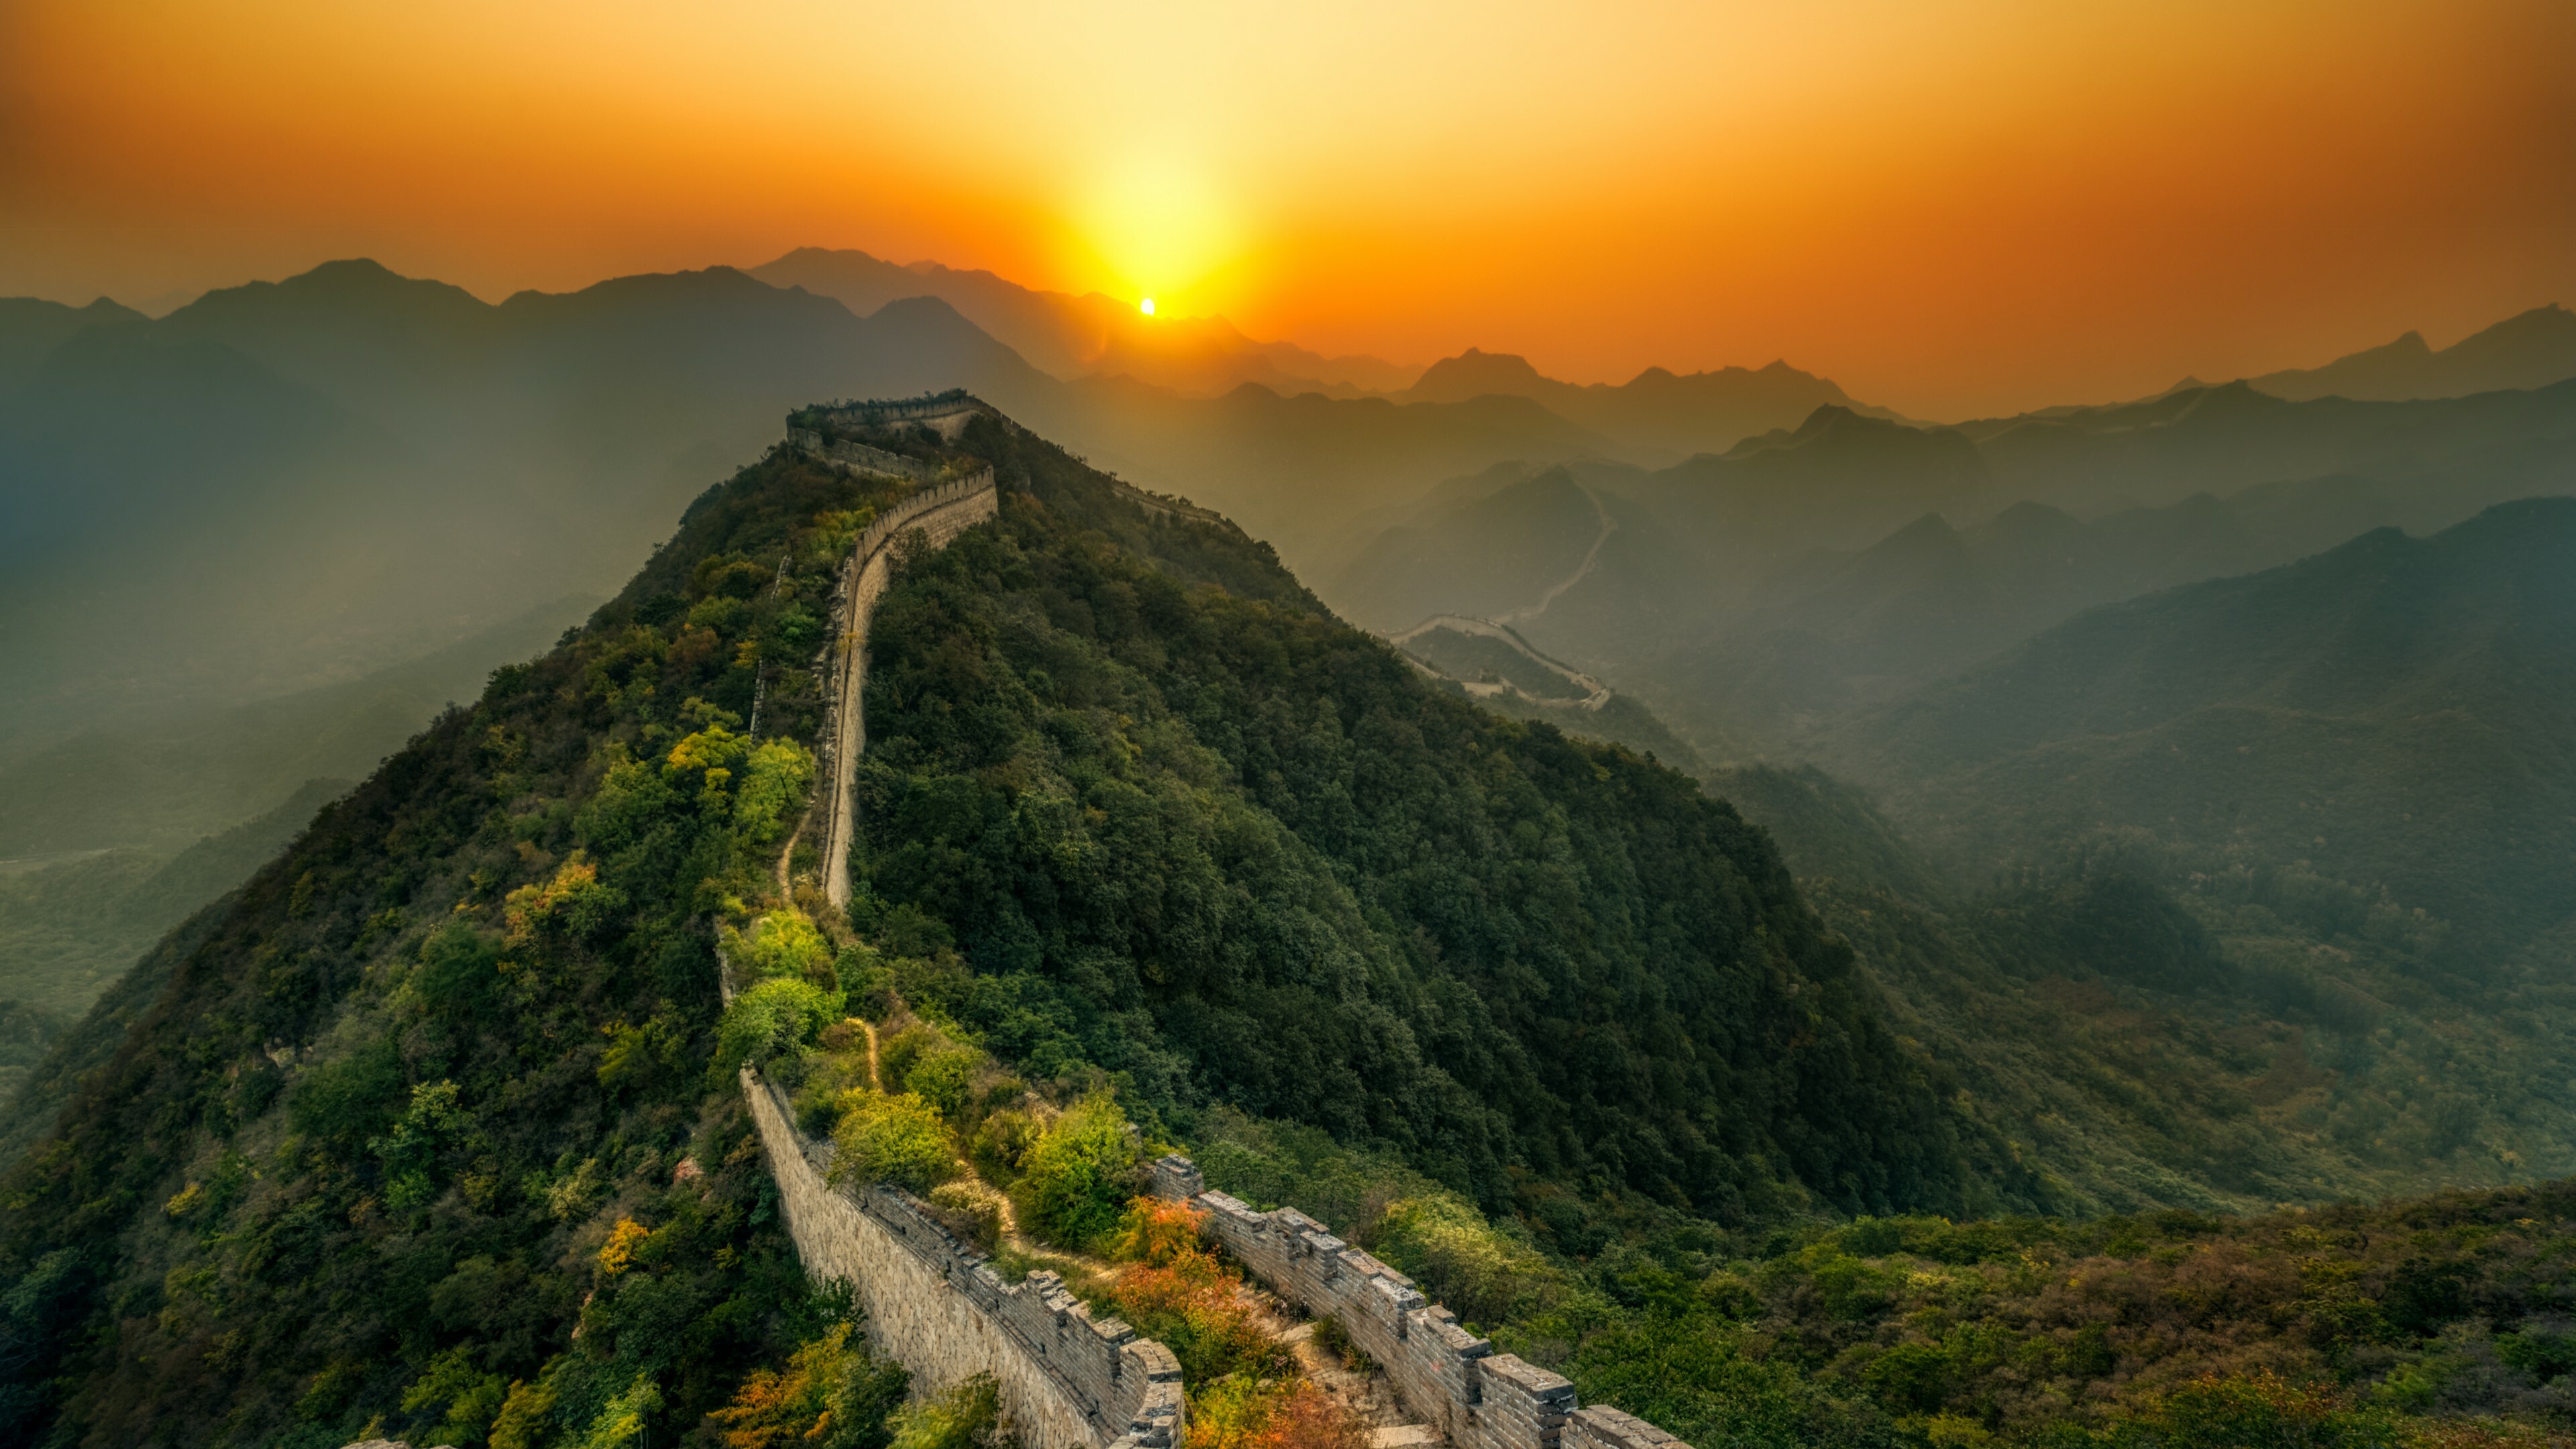 China: The Great Wall begins in the east at Shanhaiguan in Hebei province and ends at Jiayuguan in Gansu province to the west. 3840x2160 4K Wallpaper.